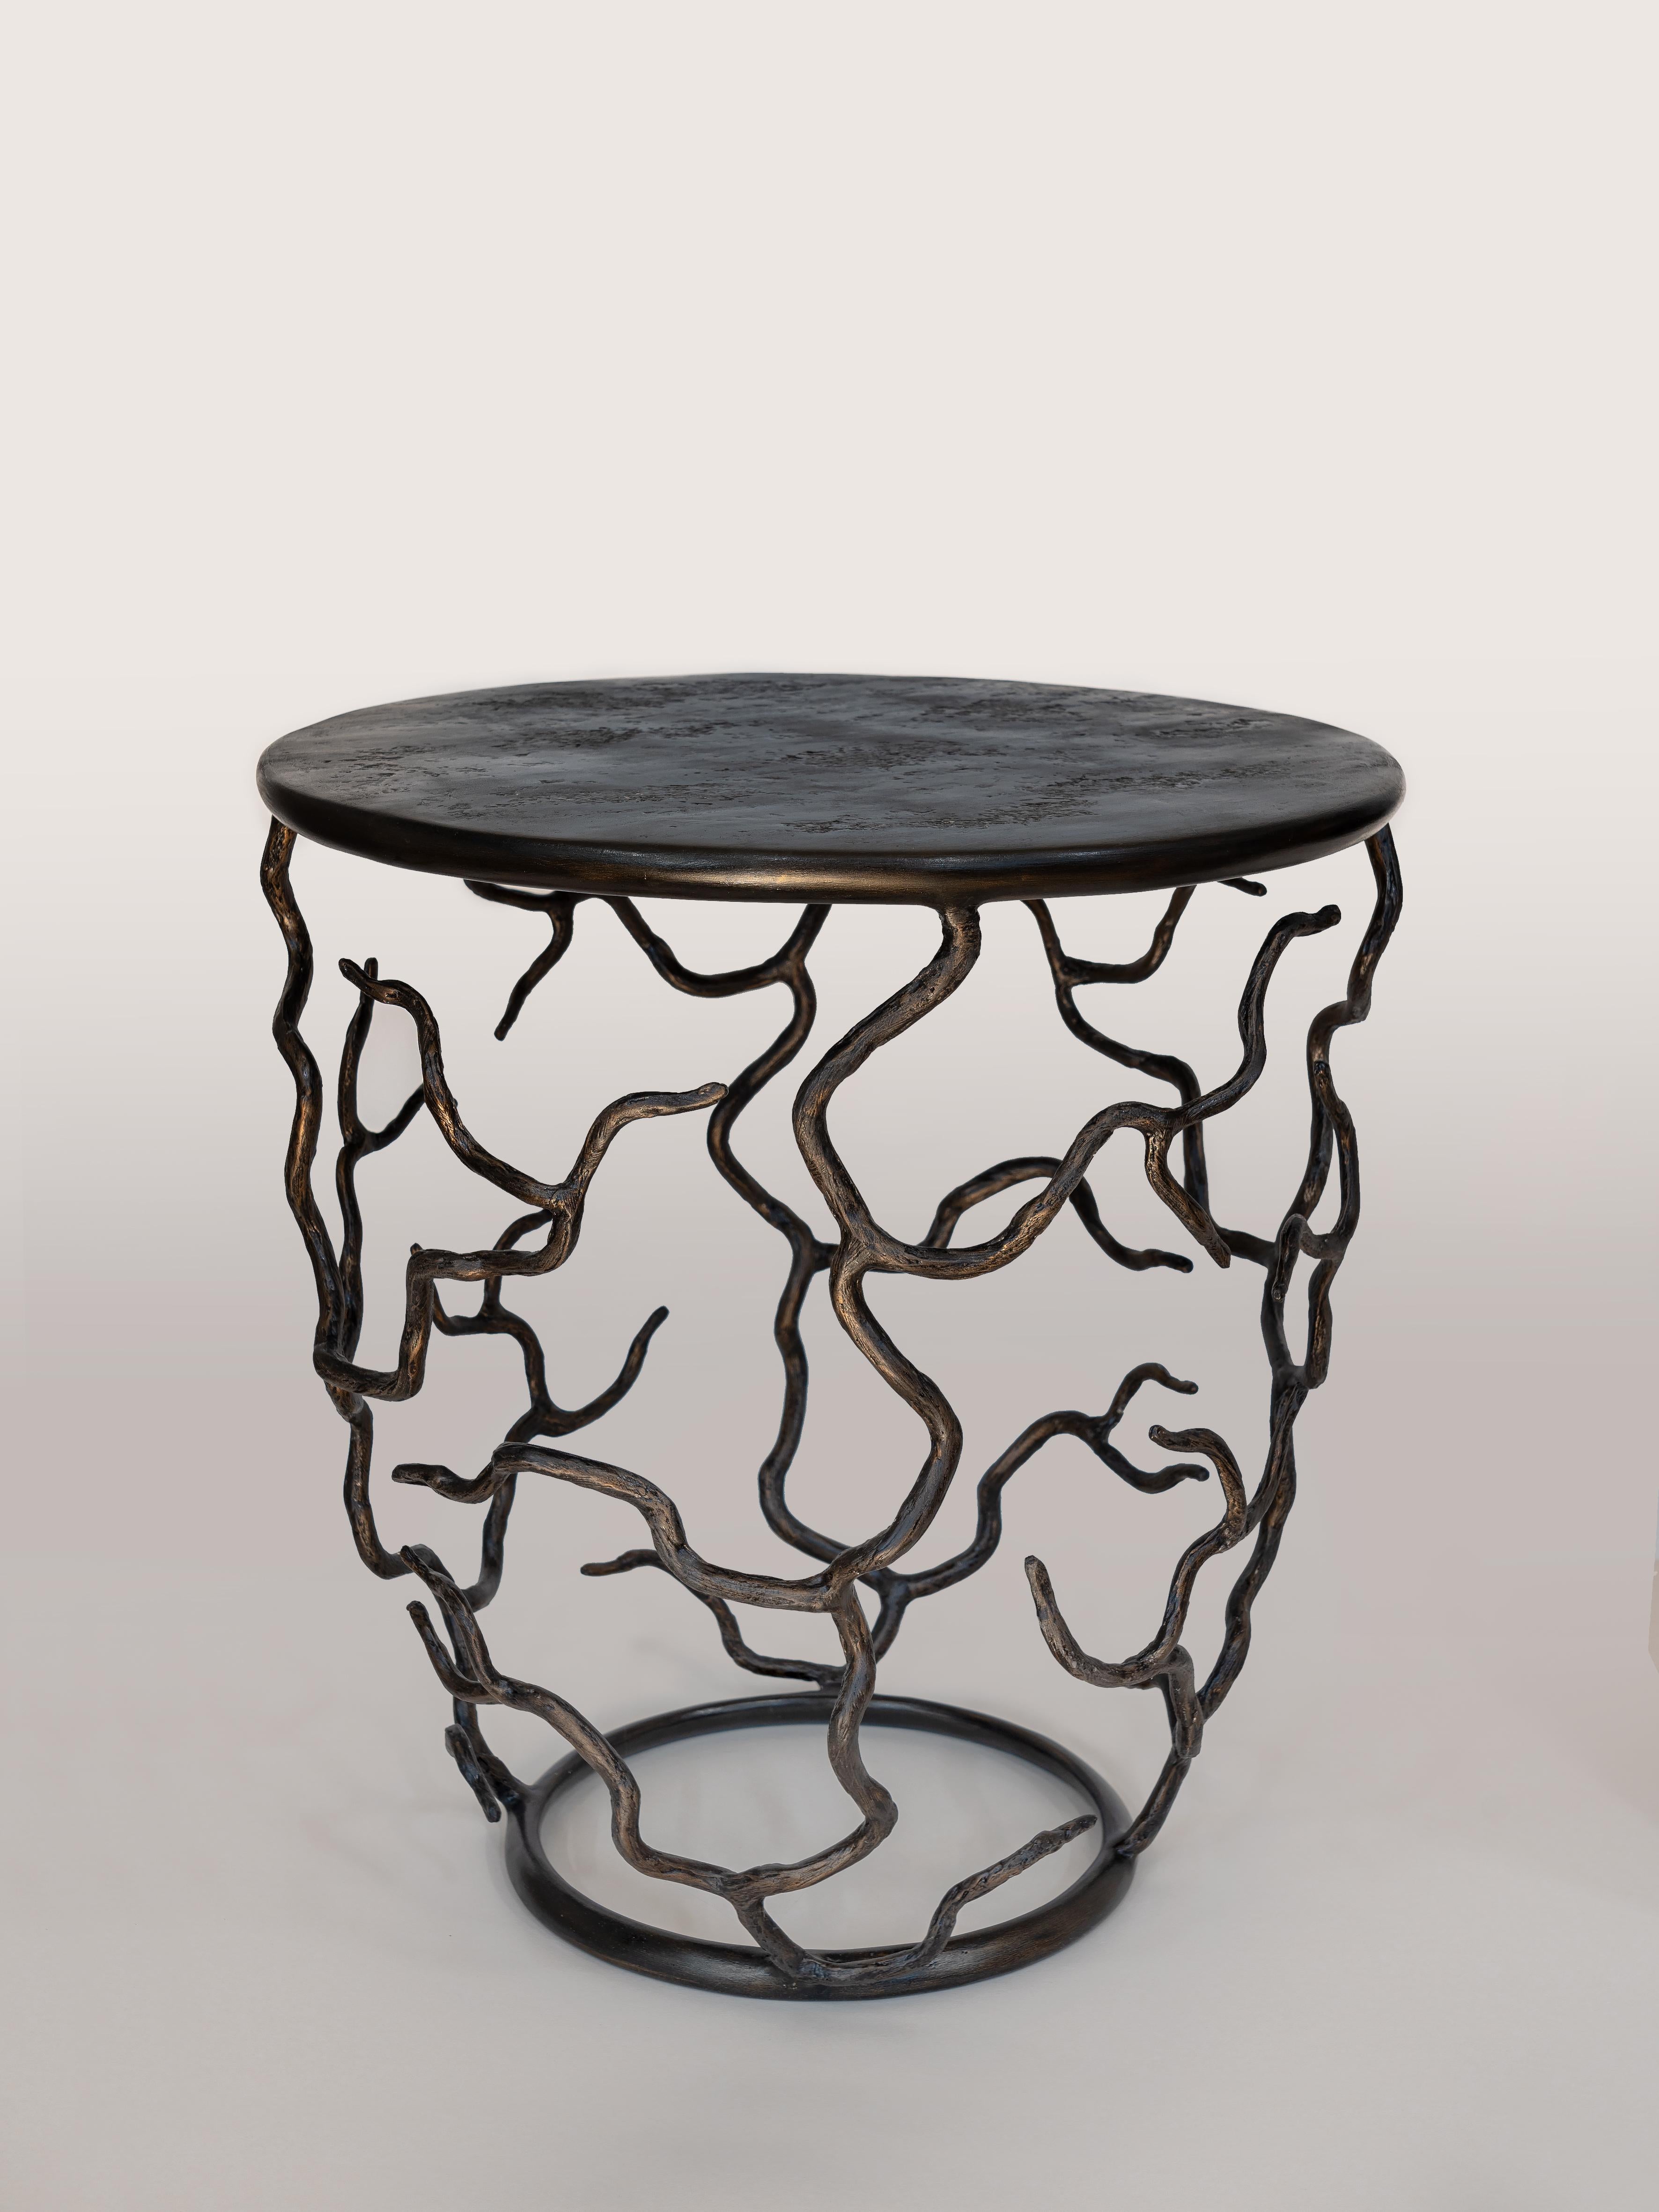 Organic forms and natural motifs. The Etna side table is individually hammered and hand formed. Each piece has been skillfully finished to resemble the texture of tree bark. The Top is hand-sculpted. Available in Antique Gold or Forest Brown Finish.